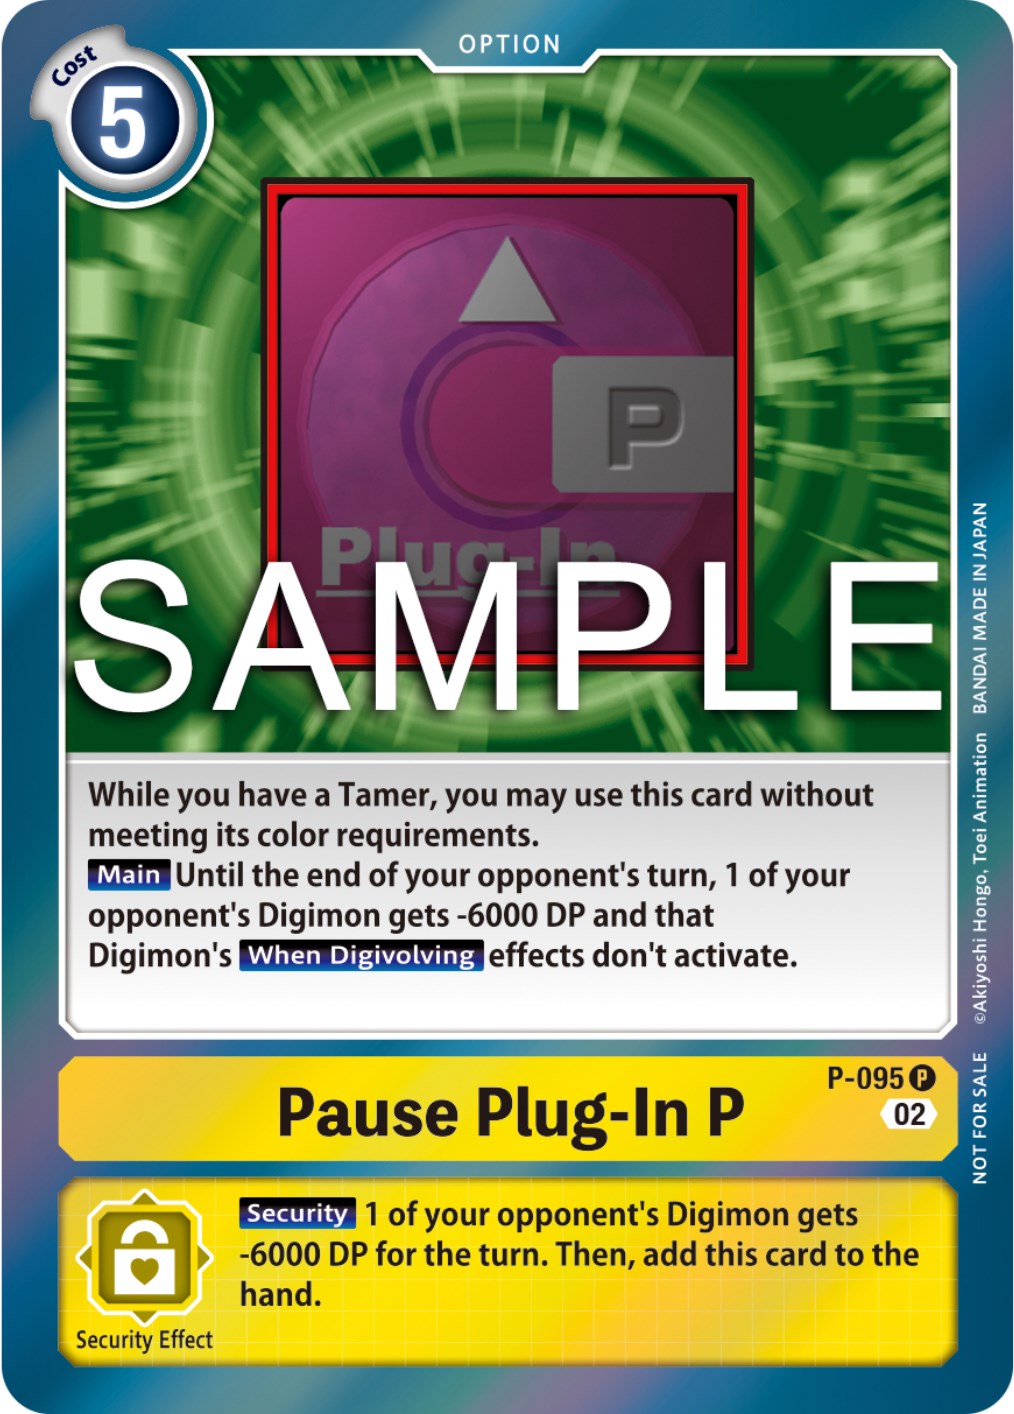 Pause Plug-In P [P-095] (3rd Anniversary Update Pack) [Promotional Cards] | Devastation Store